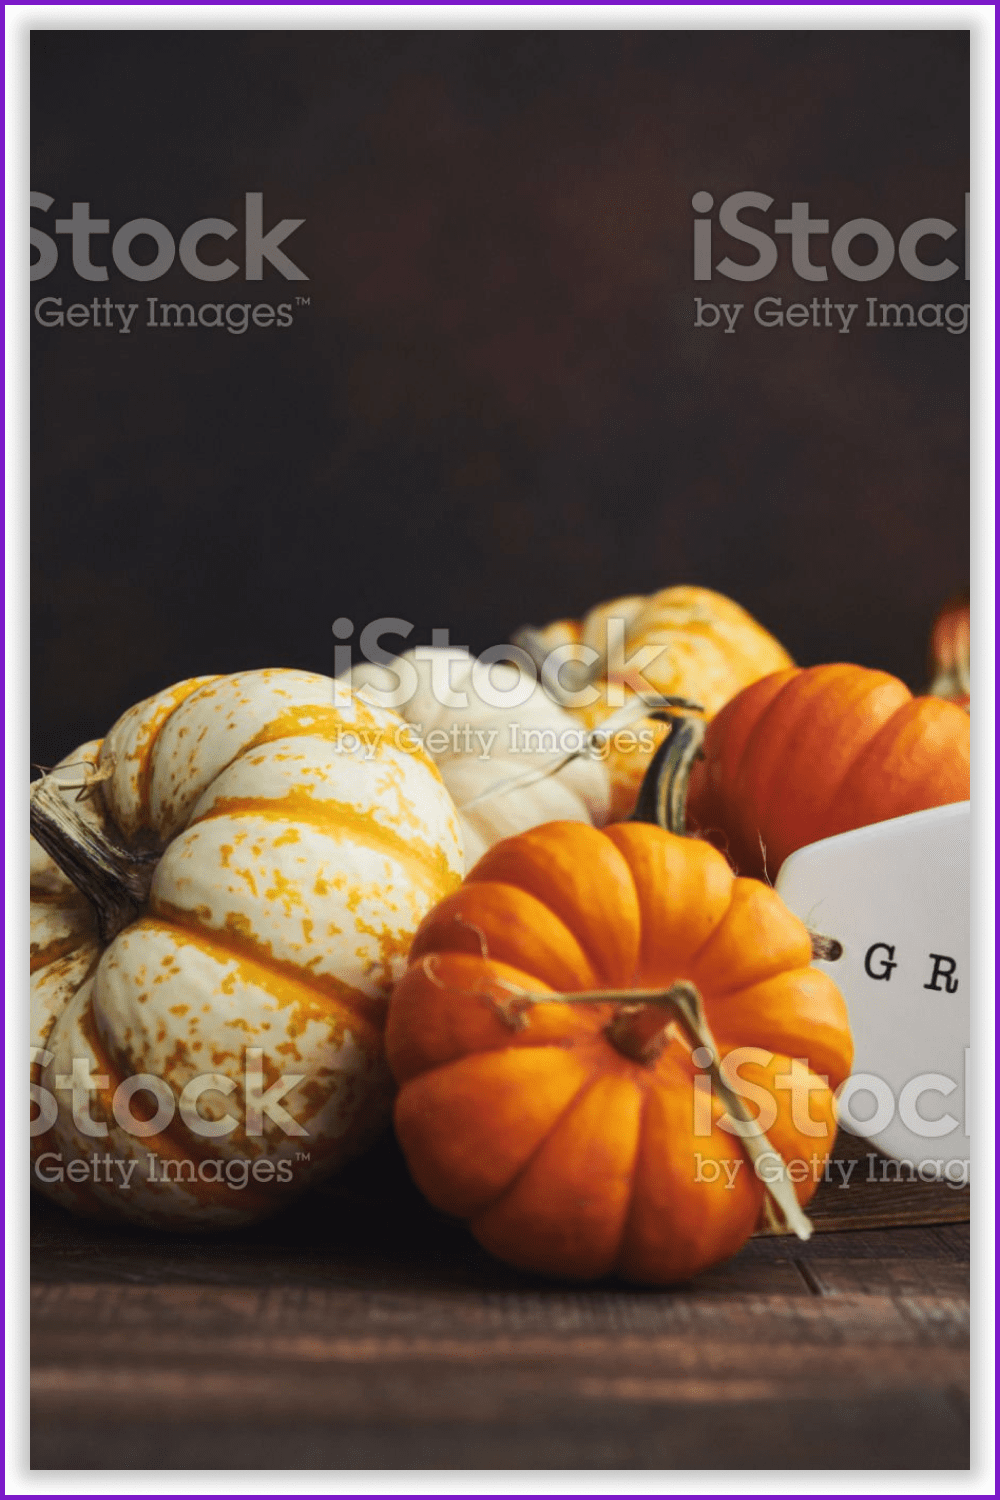 An image of miniature pumpkins in a wooden crate with the label stating “GRATEFUL”.